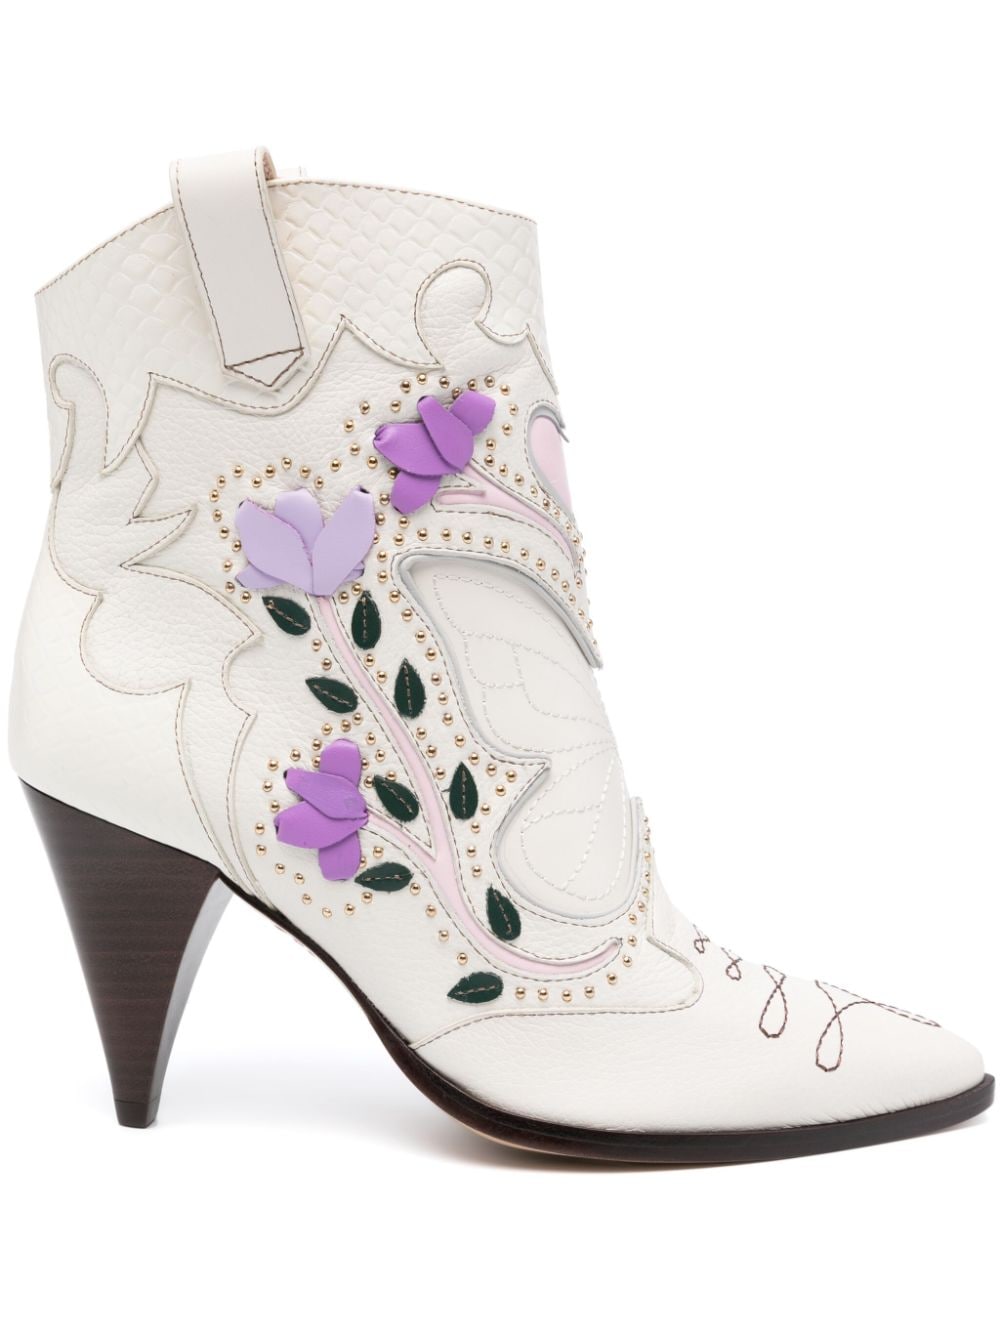 Sophia Webster Shelby 85mm cowboy boots - Bianco